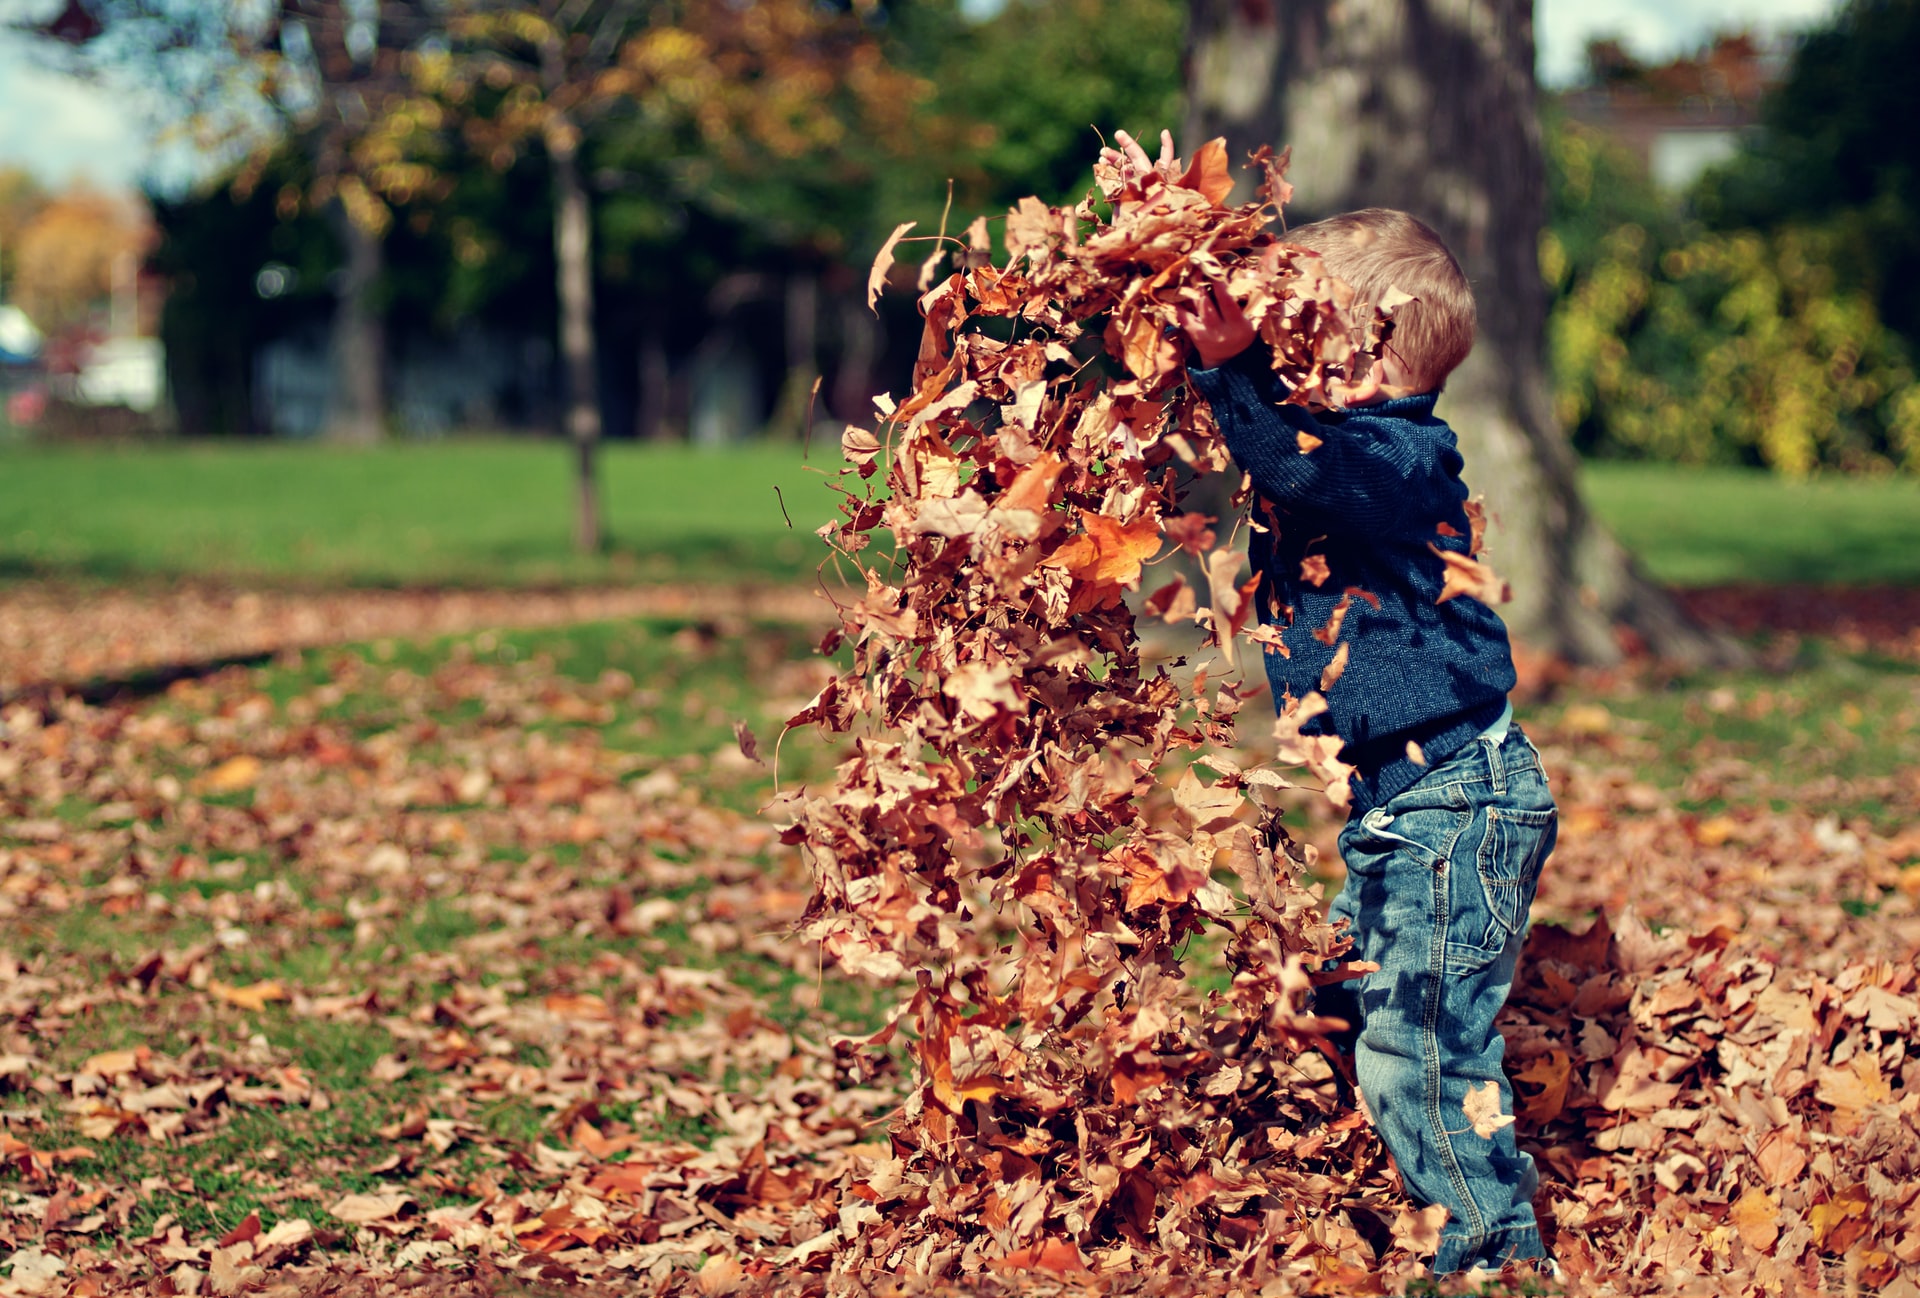 A child playing in fallen leaves